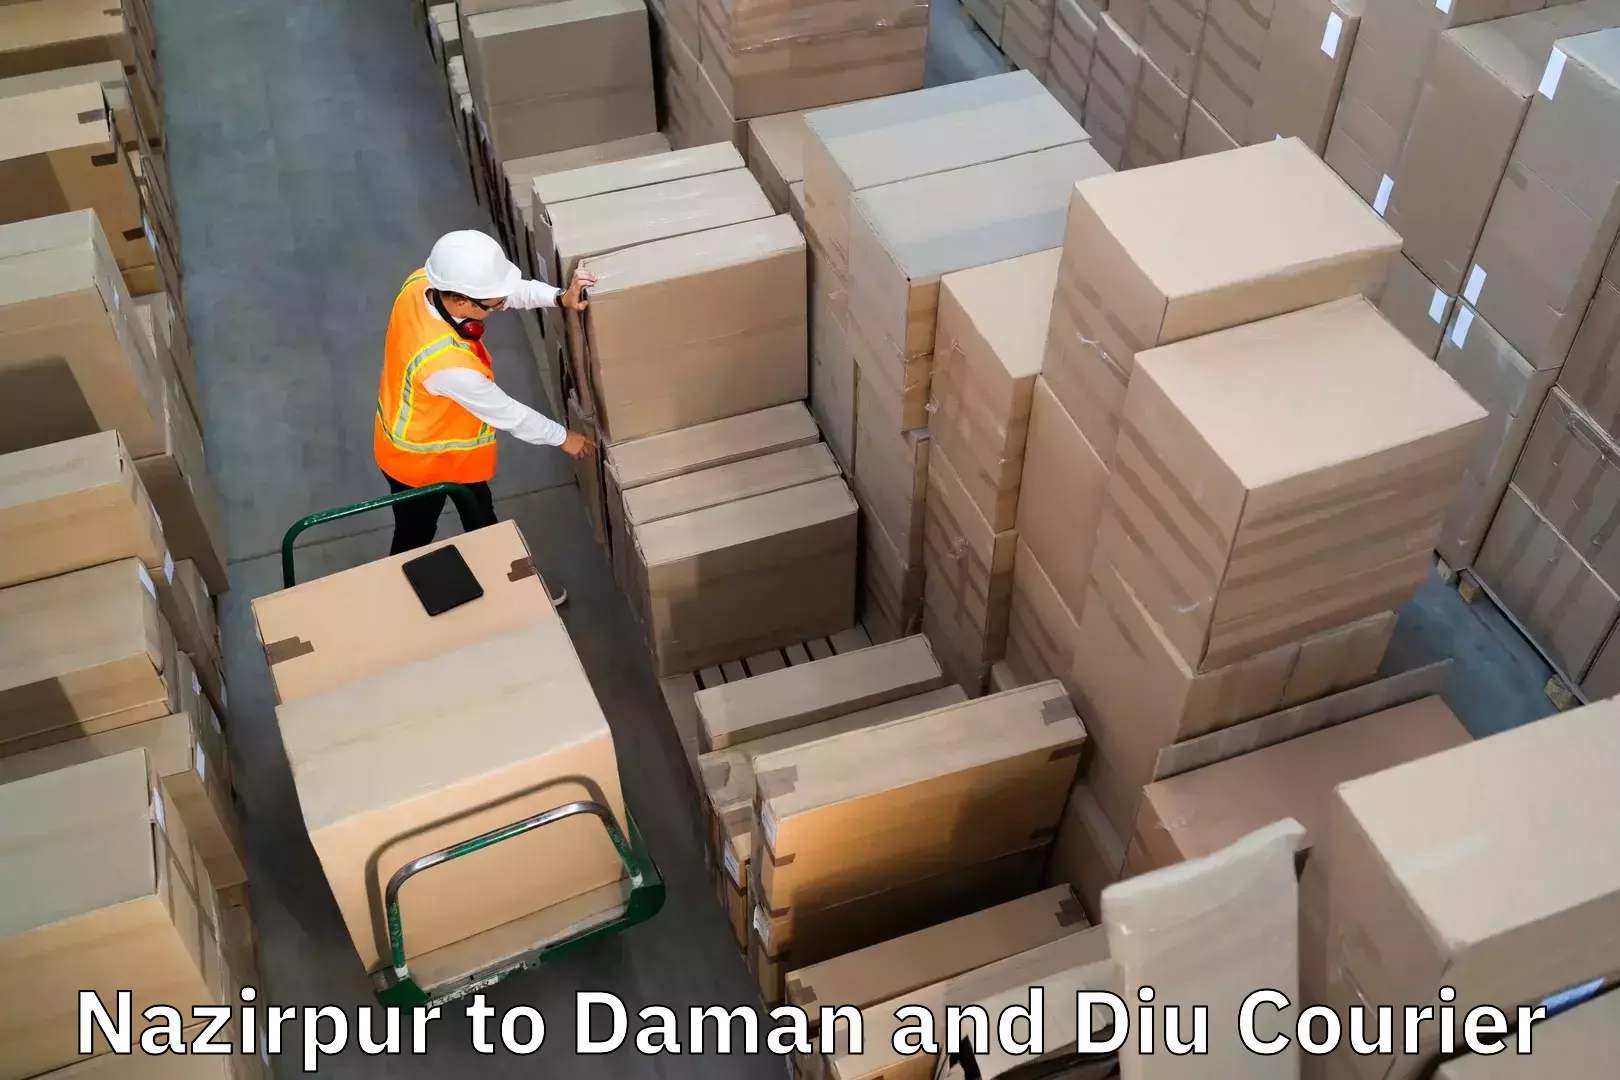 Instant baggage transport quote Nazirpur to Daman and Diu